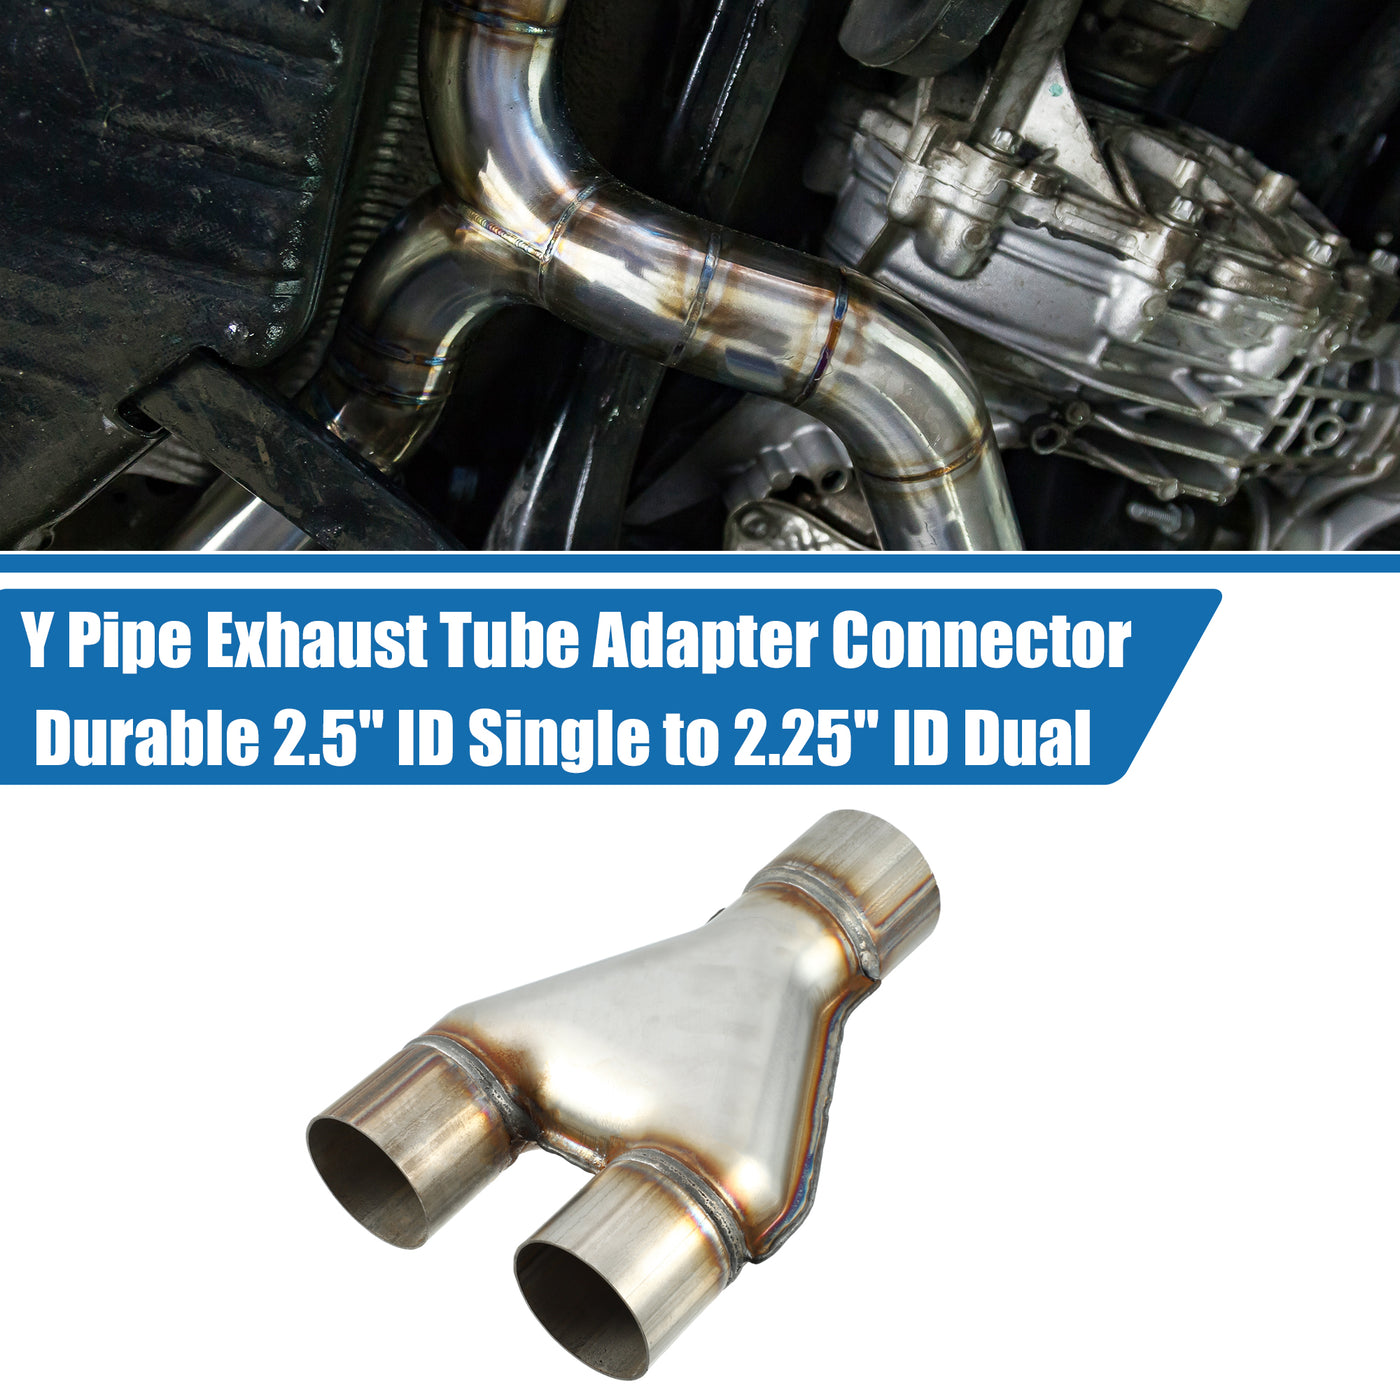 A ABSOPRO Y Pipe Exhaust Tube Adapter Connector Durable 2.5" ID Single to 2.25" ID Dual Exhaust Adapter Connector 10 Inch Overall Length T409 Stainless Steel Silver Tone